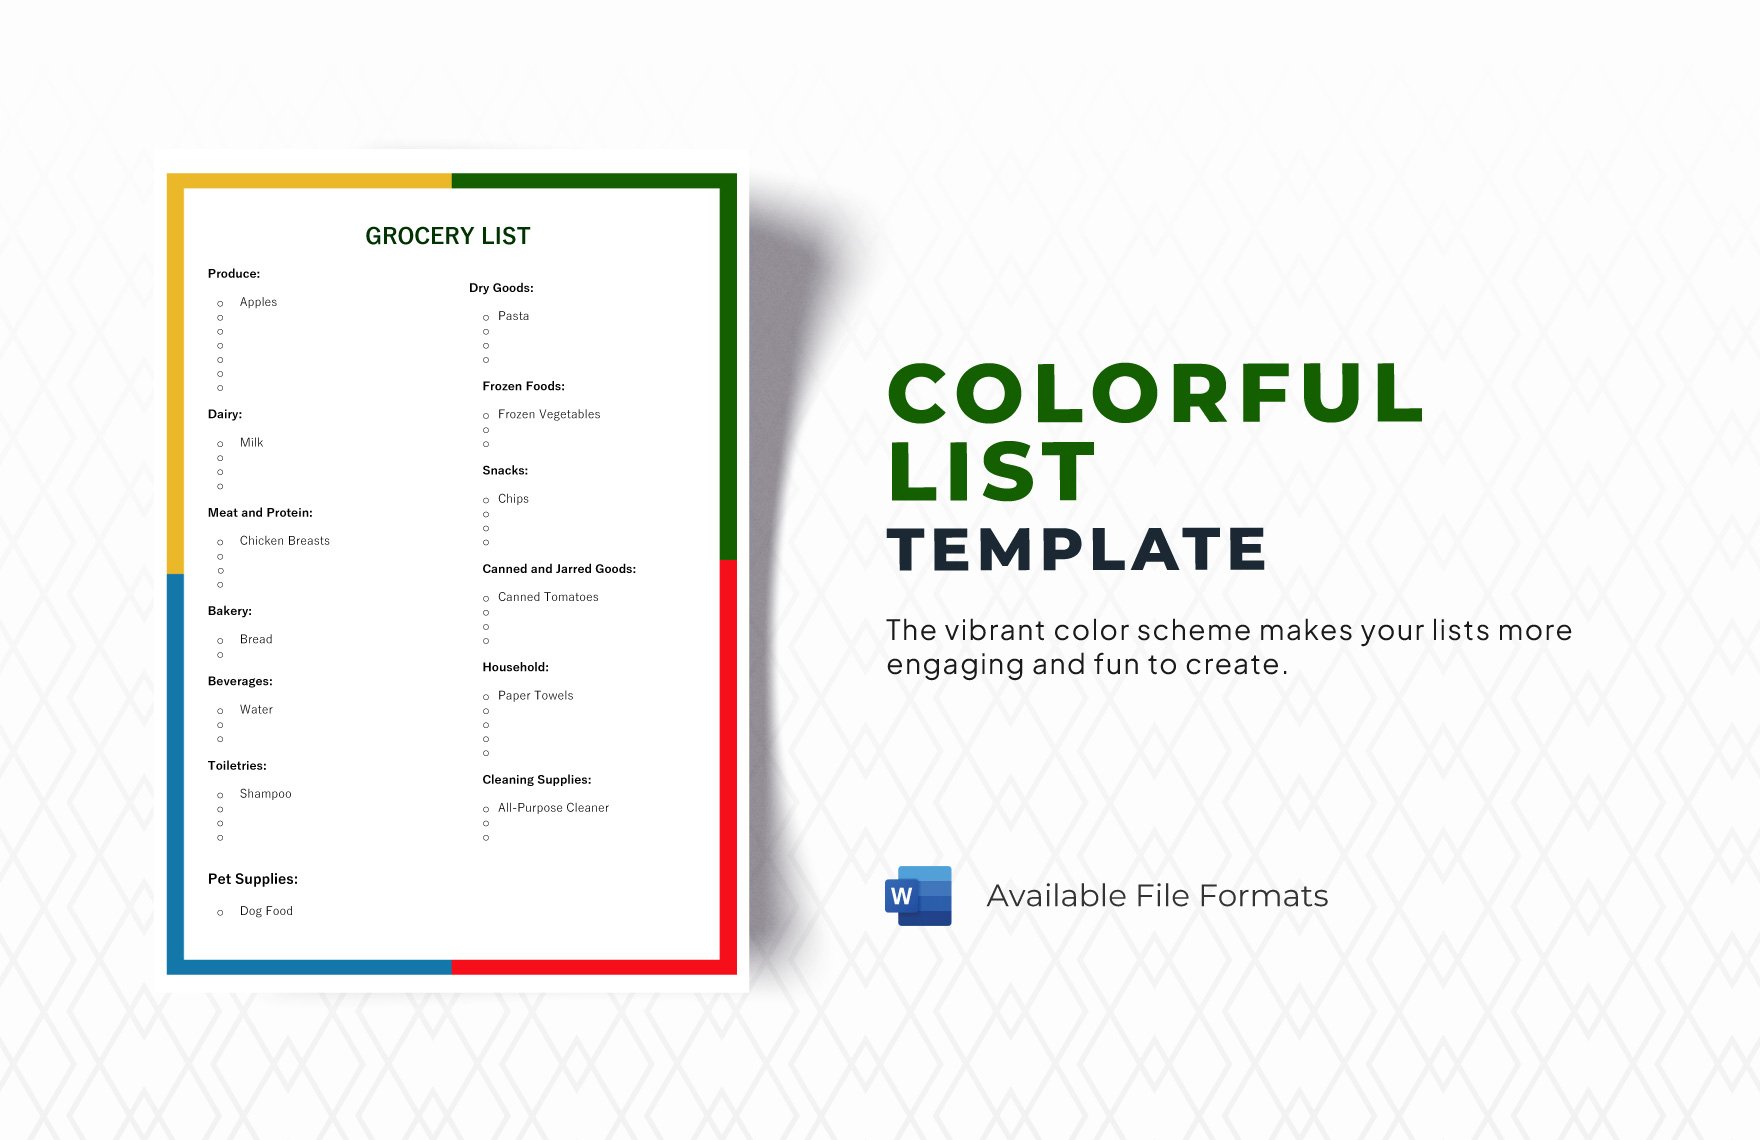 Colorful List Template